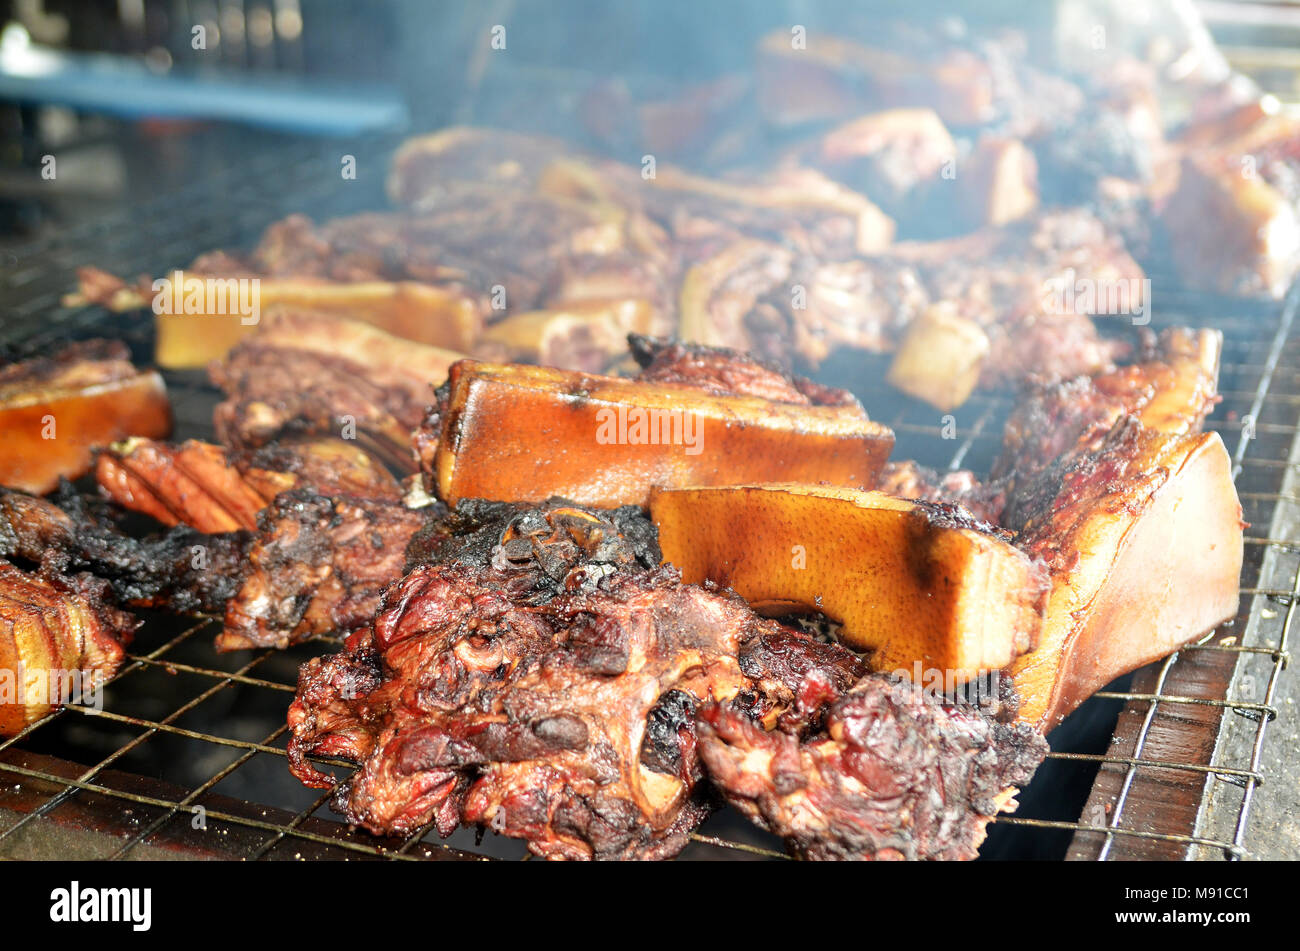 Sinalau Bakas or Smoked Wild Boar is one of Sabah's most popular native dishes, an iconic food of Kadazandusun people, the largest ethnic group in Nor Stock Photo